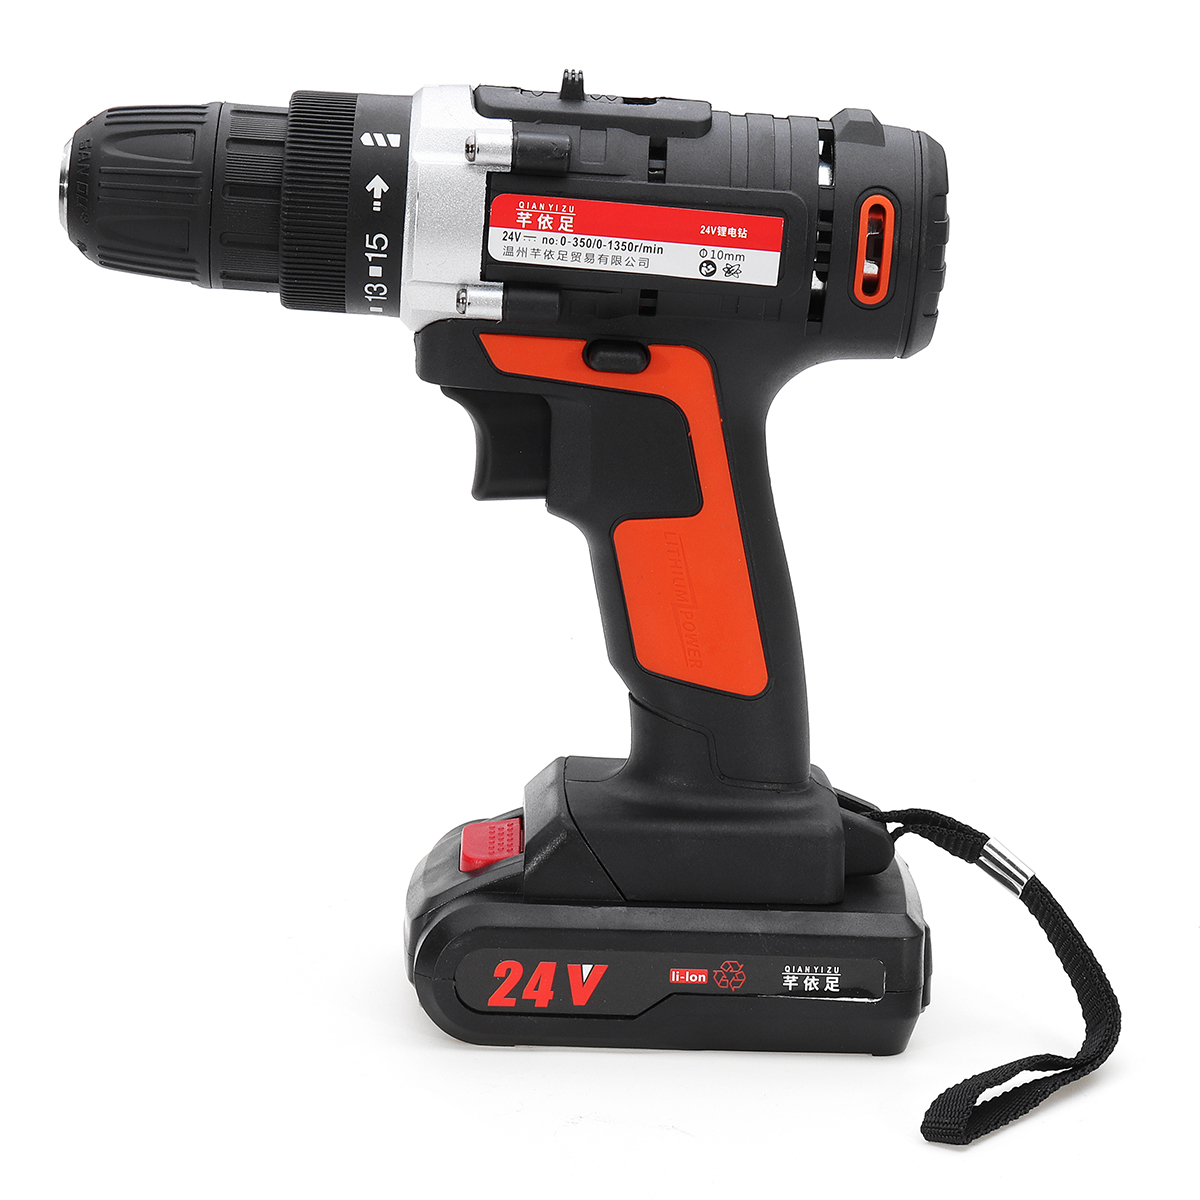 

15 Gear 24V Cordless Power Drills Electric Drill Driver 2 Speed Power Driver Power Tools With 2 Batteries